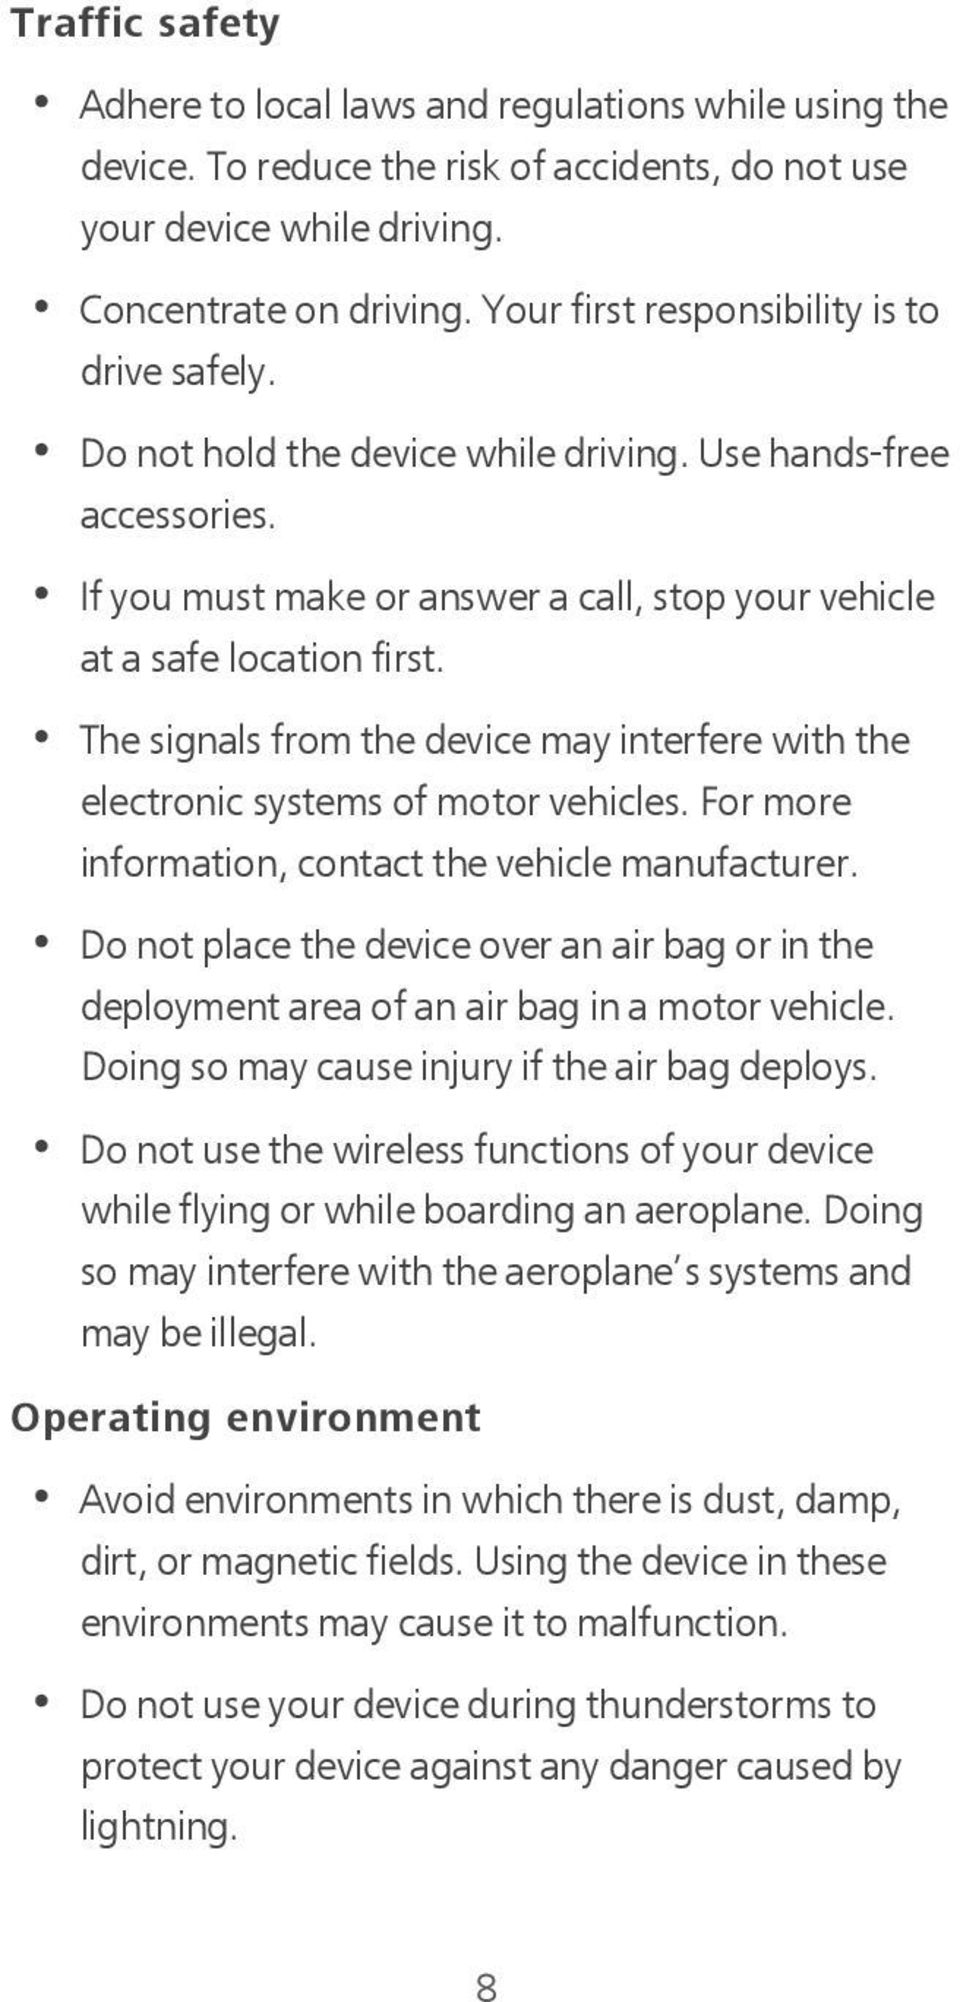 The signals from the device may interfere with the electronic systems of motor vehicles. For more information, contact the vehicle manufacturer.